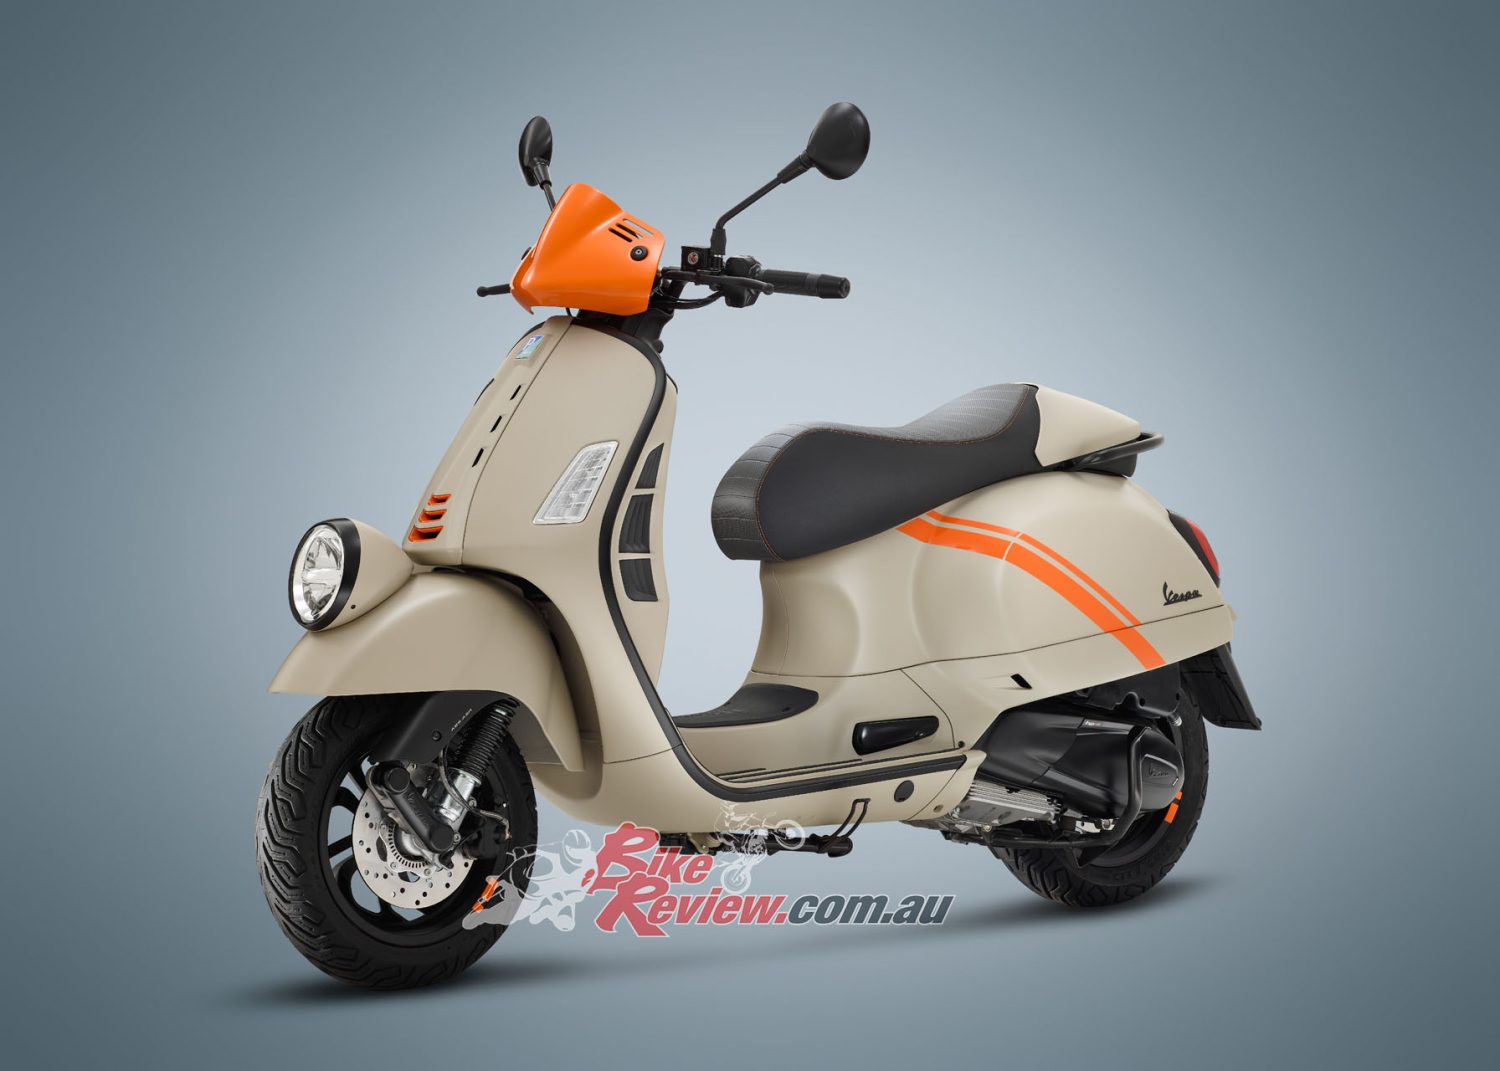 The new Vespa Gtv is powered by the gritty 300 hpe (High Performance Engine) single cylinder, with four-valve timing, liquid cooling, and electronic fuel injection.